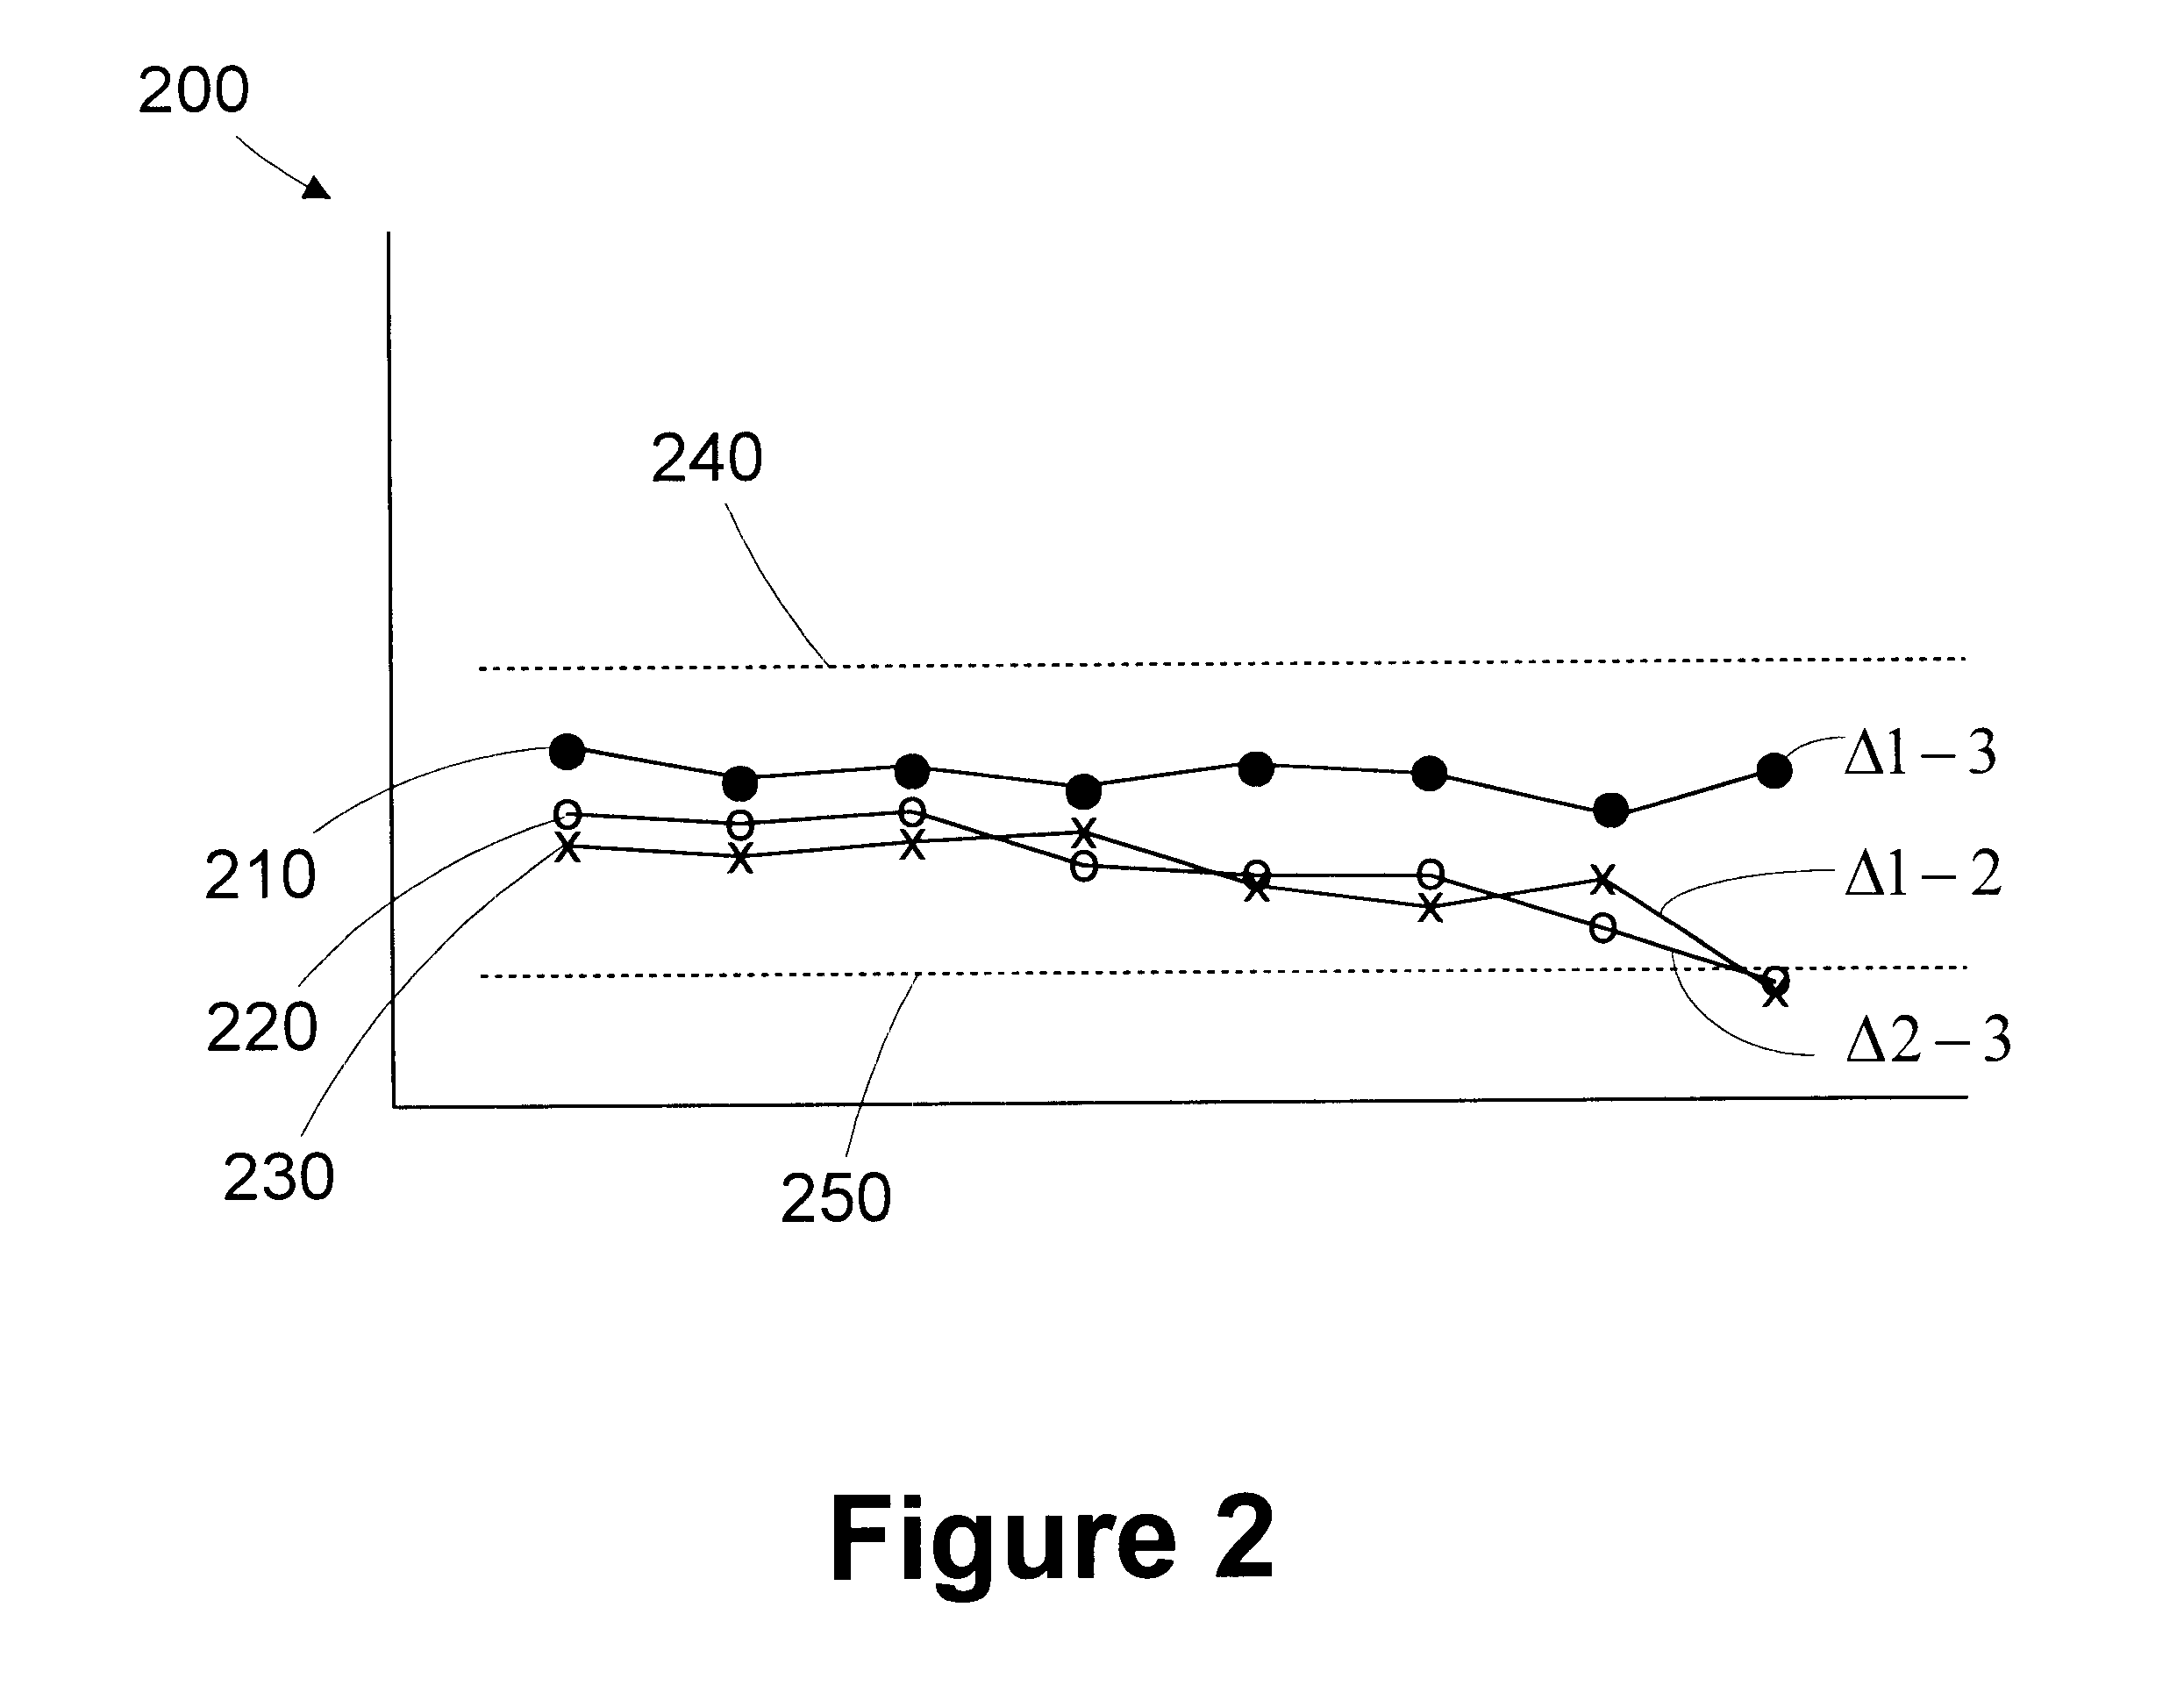 Method and apparatus for characterizing semiconductor device performance variations based on independent critical dimension measurements